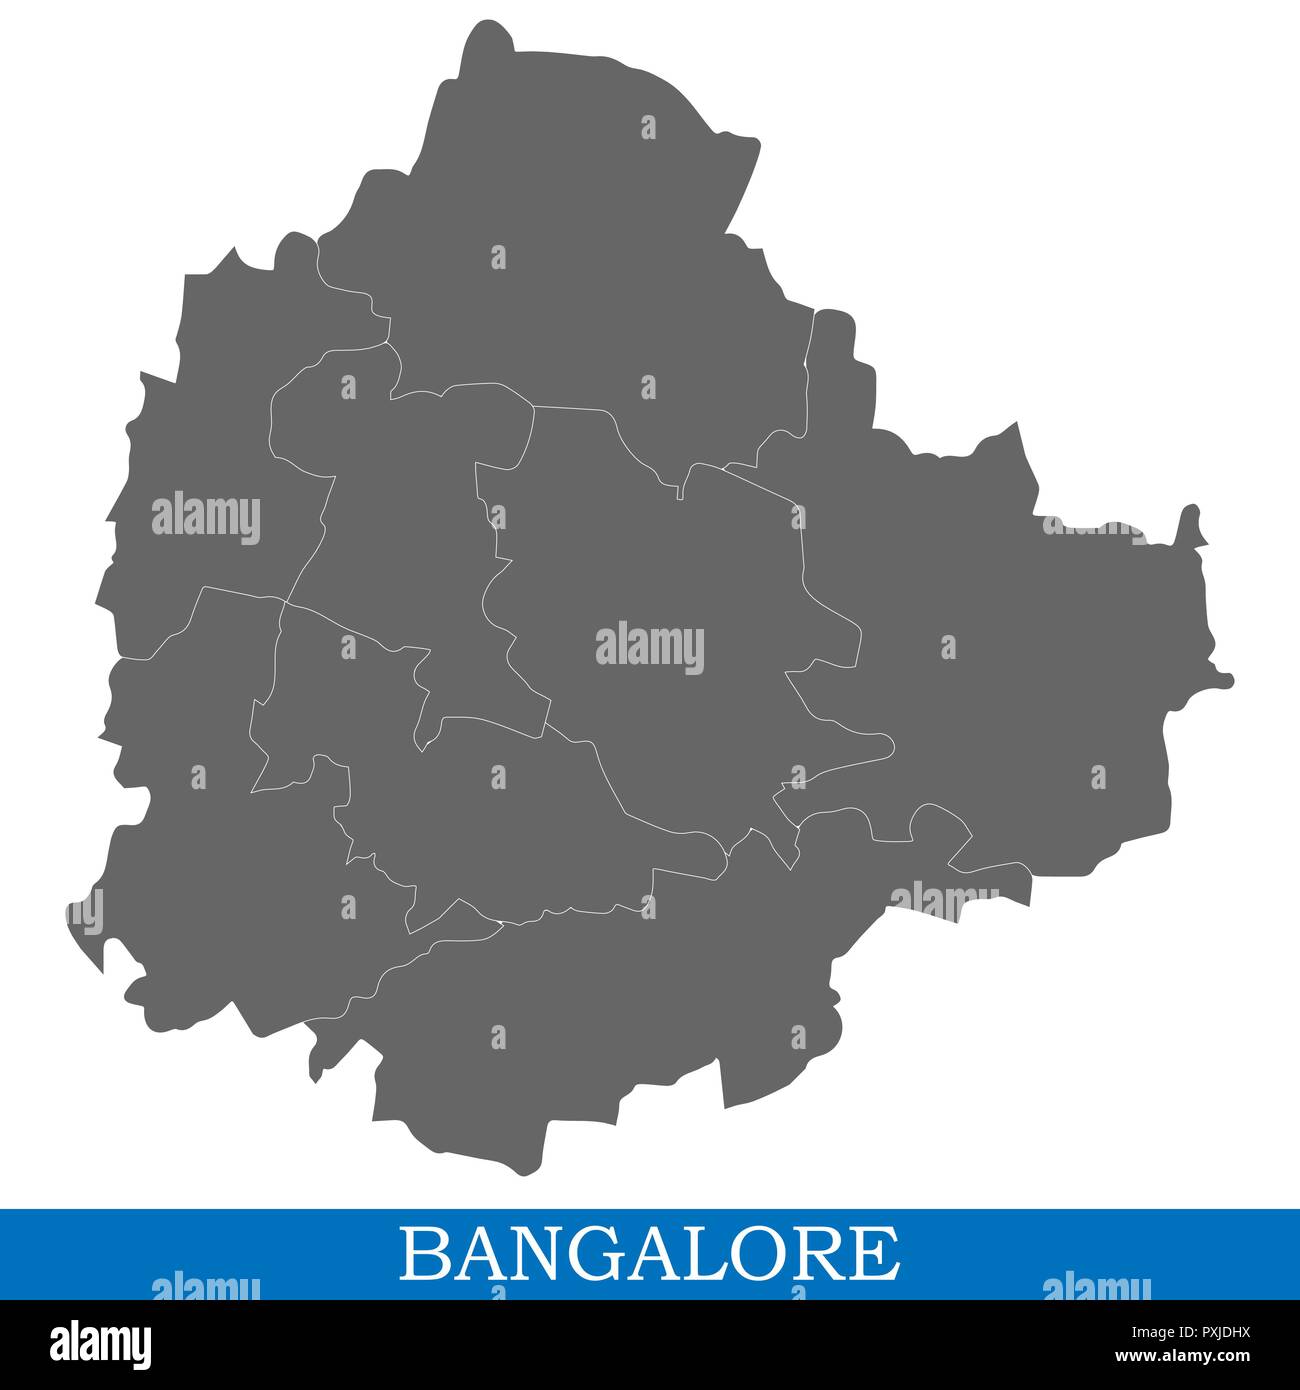 High Quality Map Of Bangalore Is A City Of India With Borders Of Districts PXJDHX 